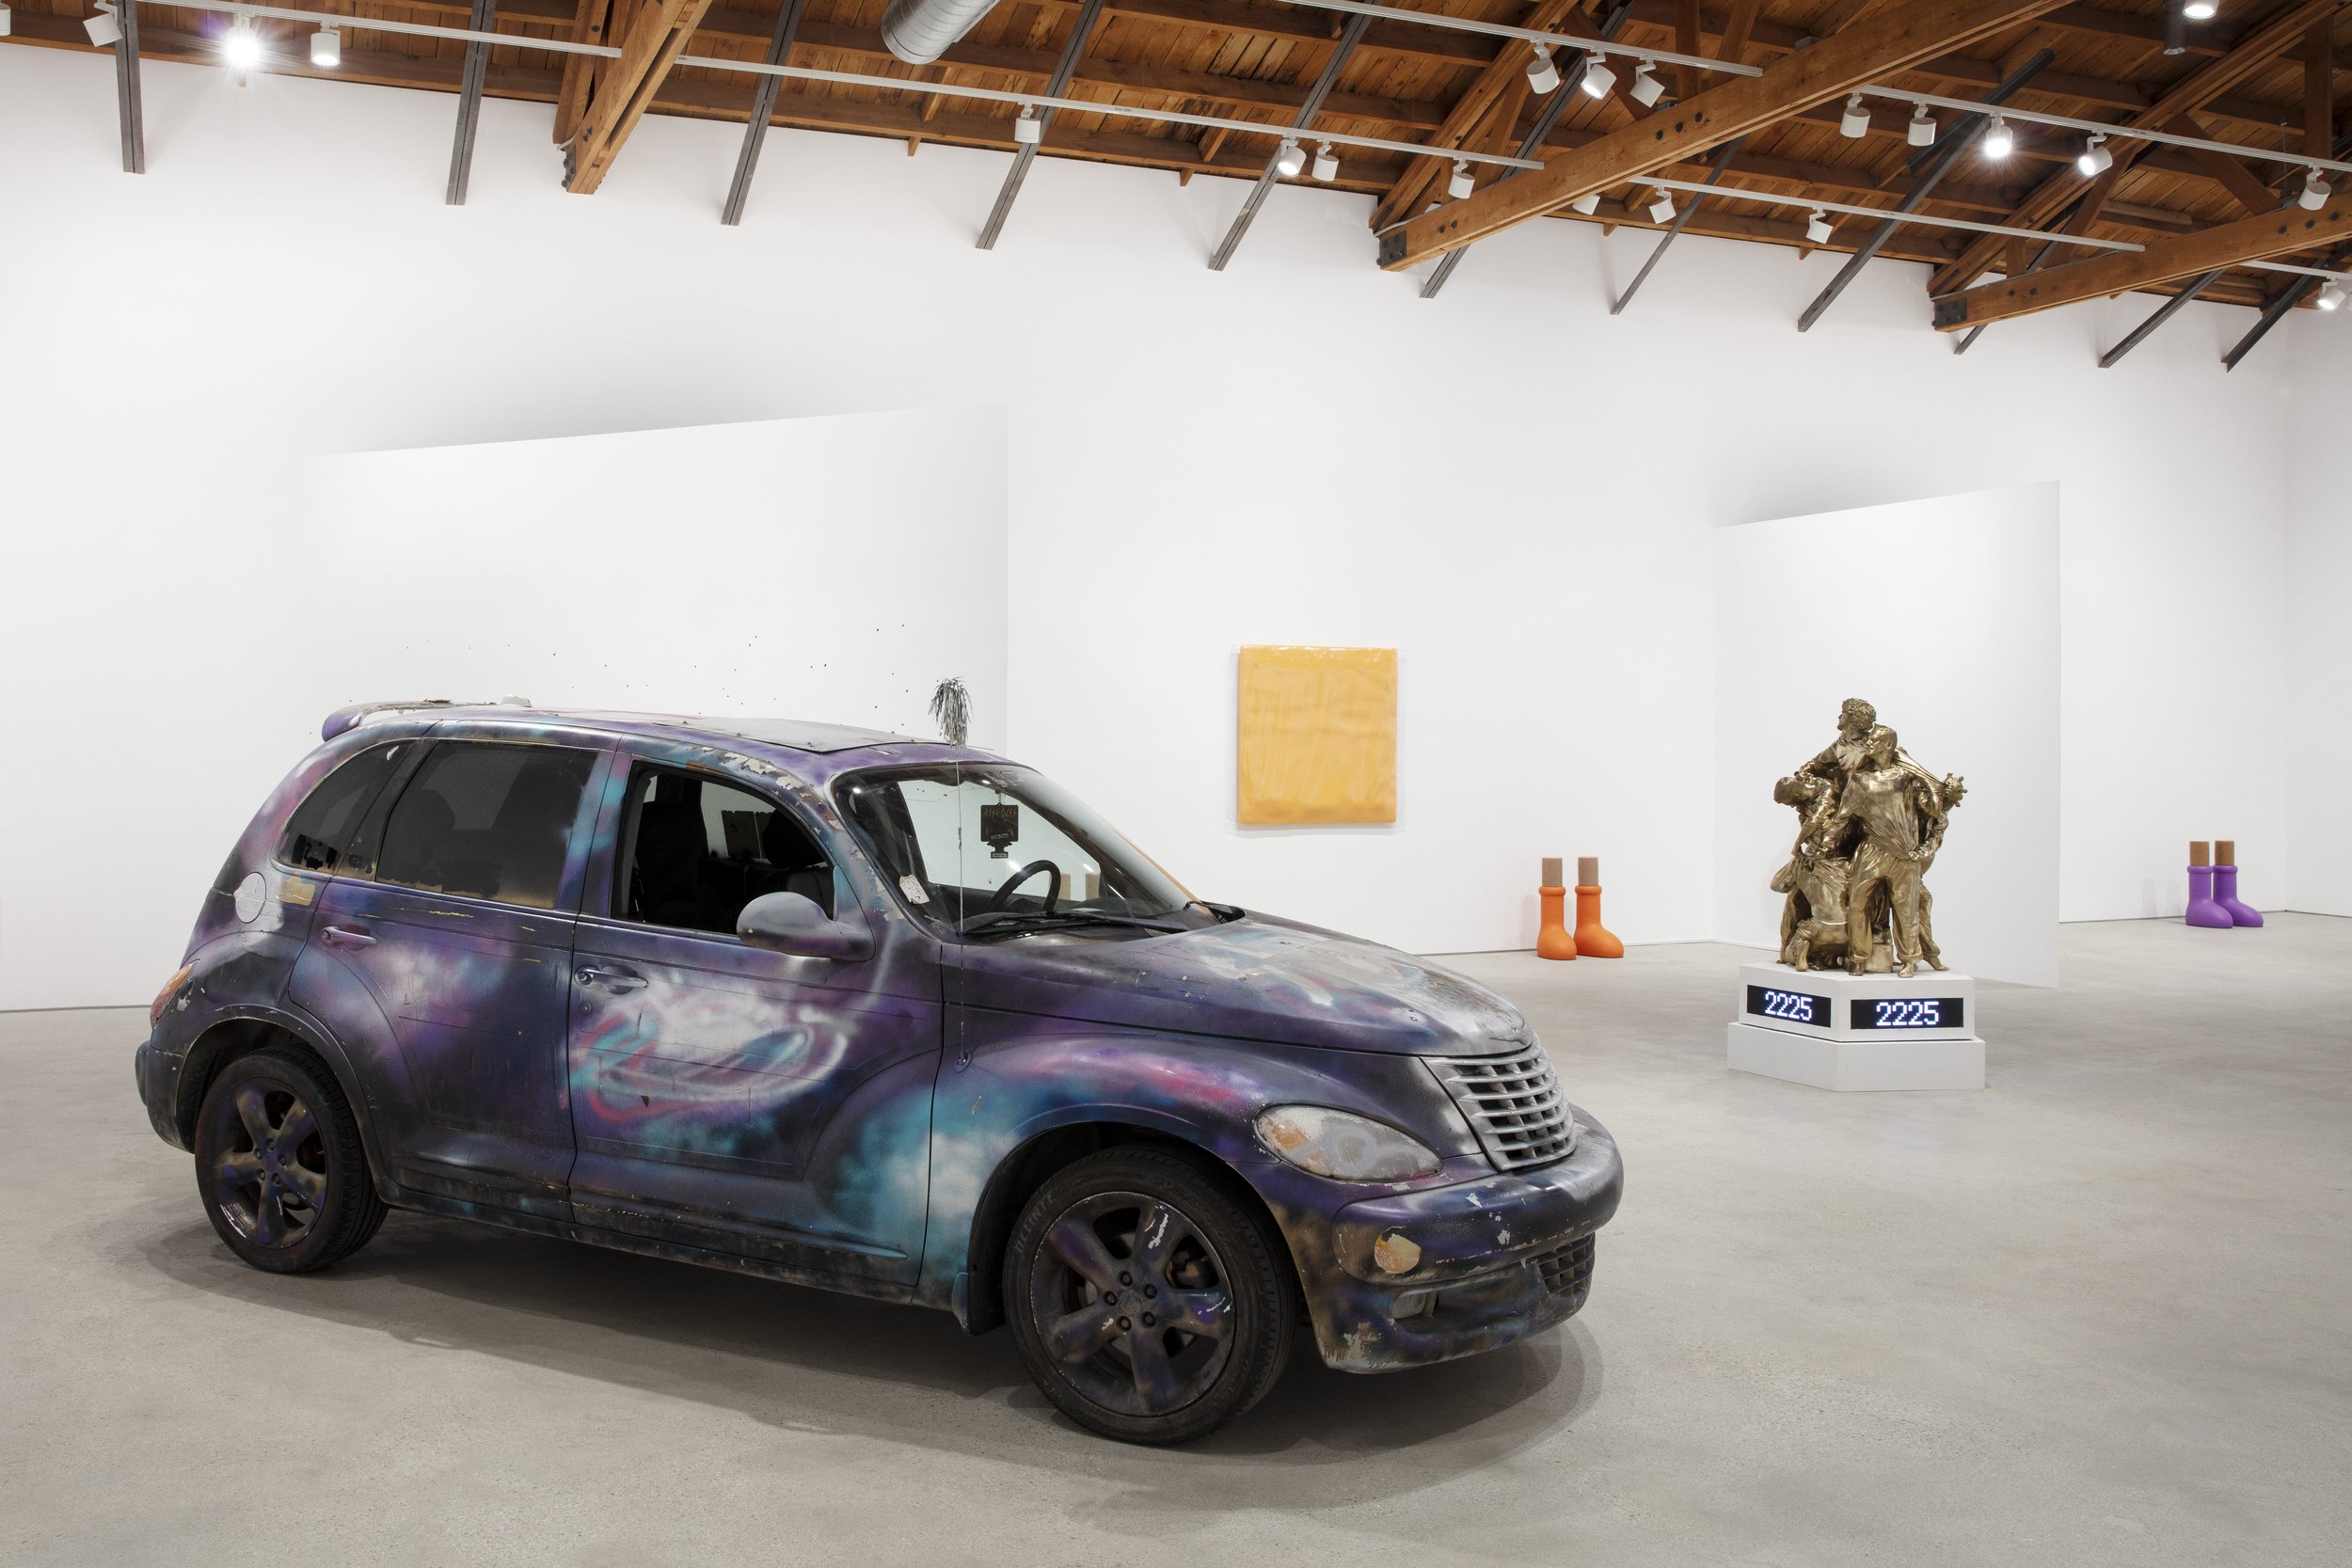  Installation view of MSCHF:  Art 2  at Perrotin Los Angeles, 2024. Photographer: Guillaume Ziccarelli. Courtesy of MSCHF and Perrotin.  